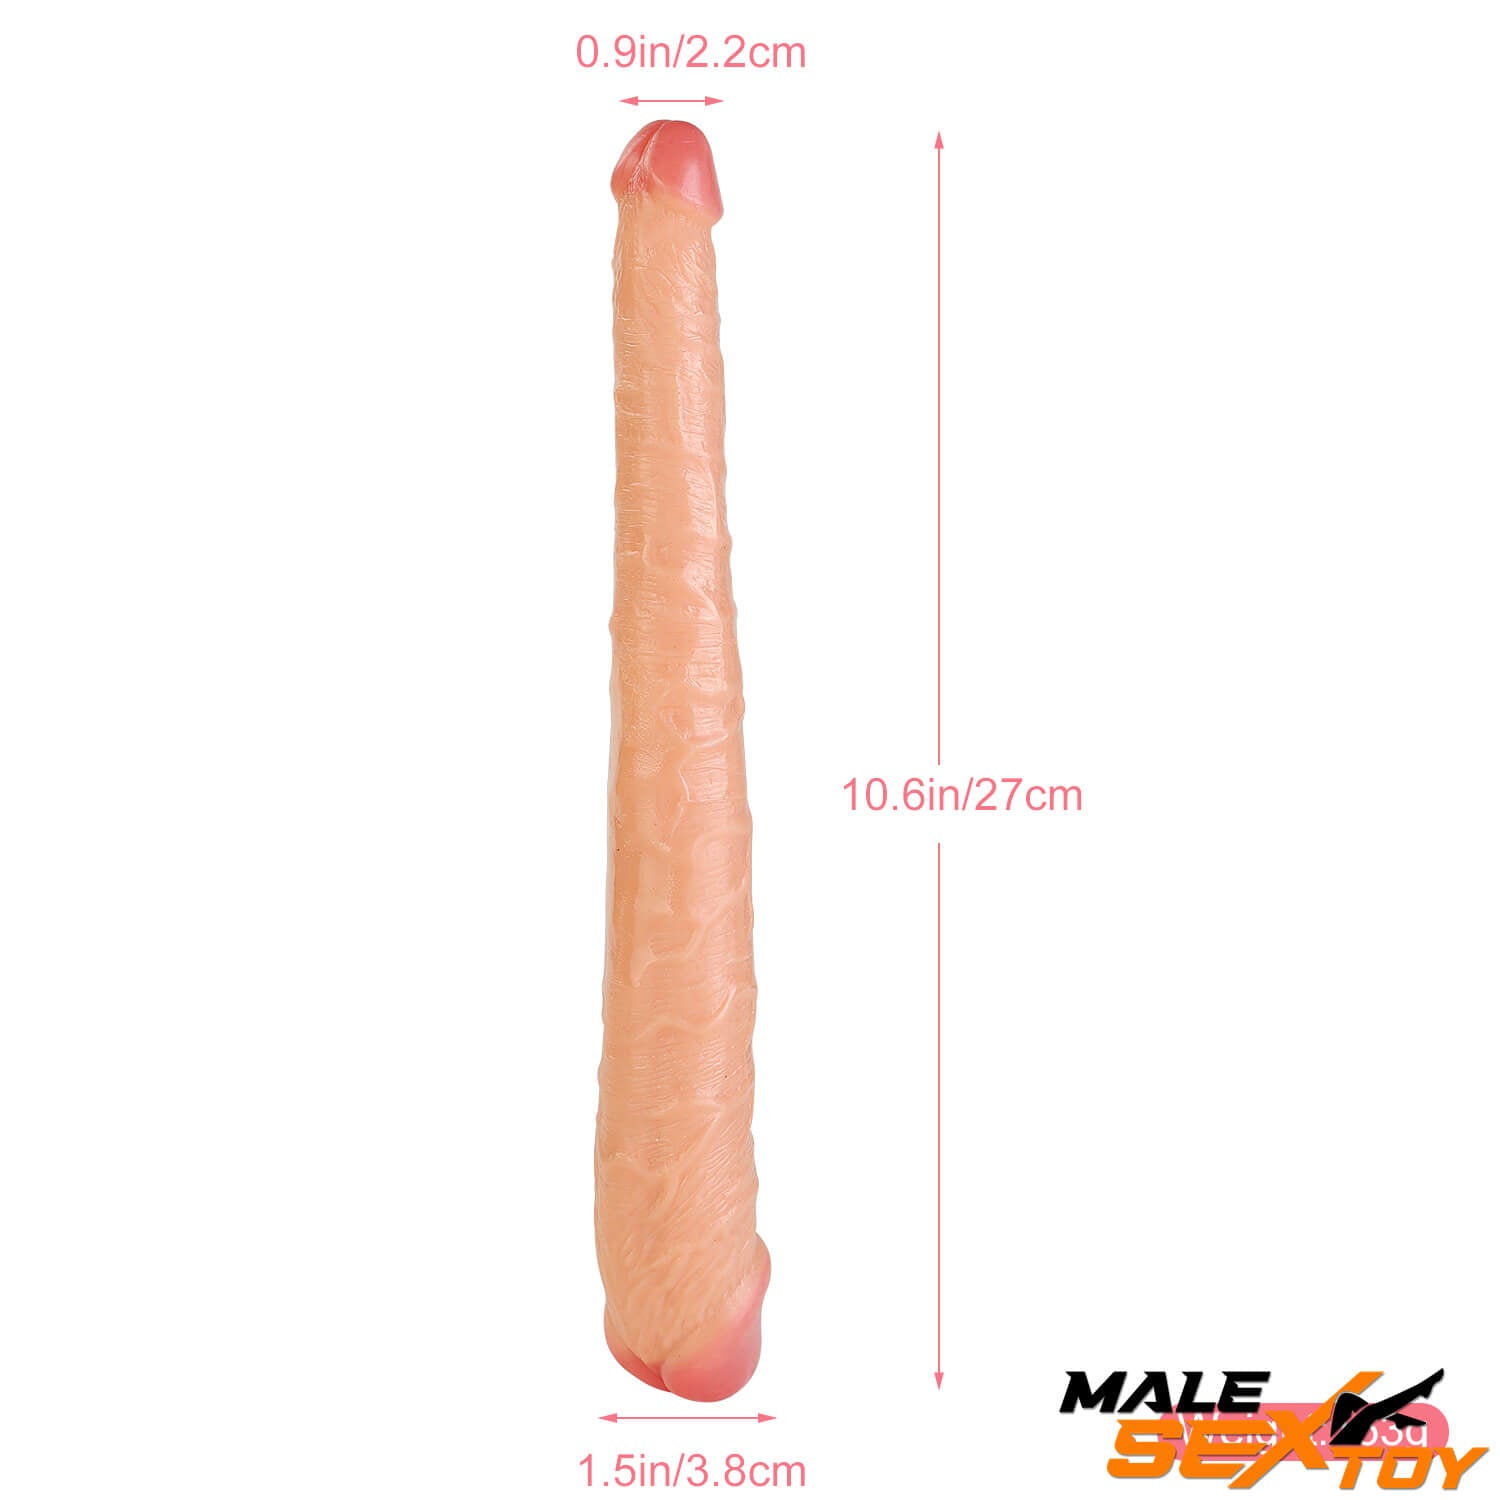 14.6in 10.6in Big Small Glans Dual Heads Dildo For Gay Men